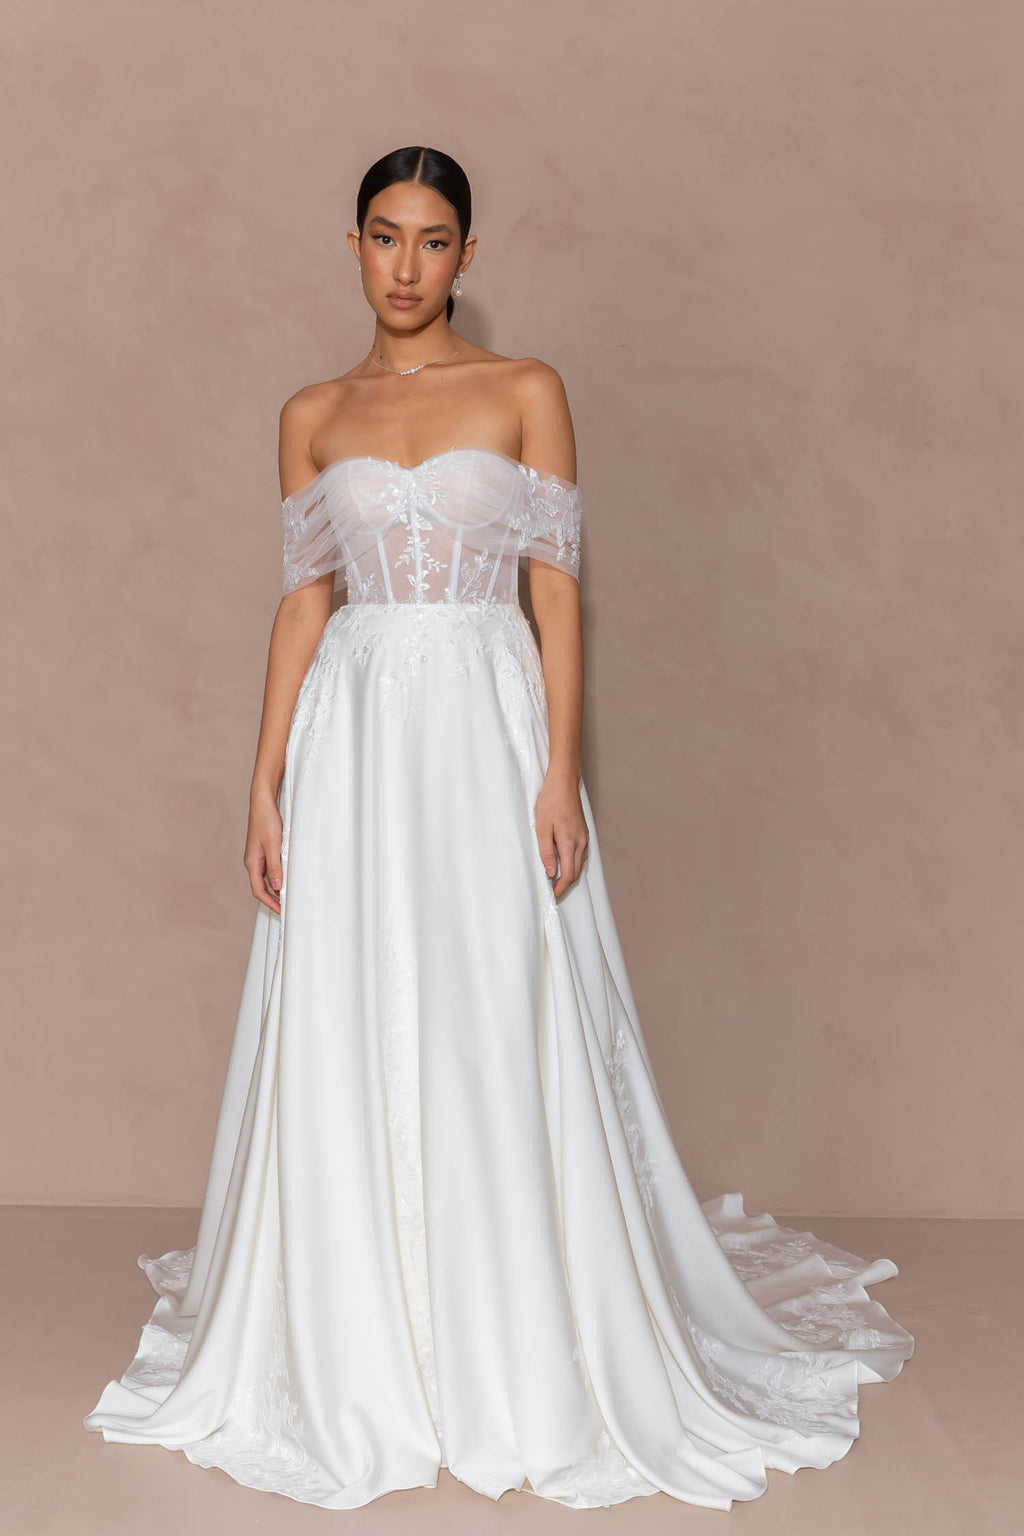 DRESSES – Evie Young Bridal